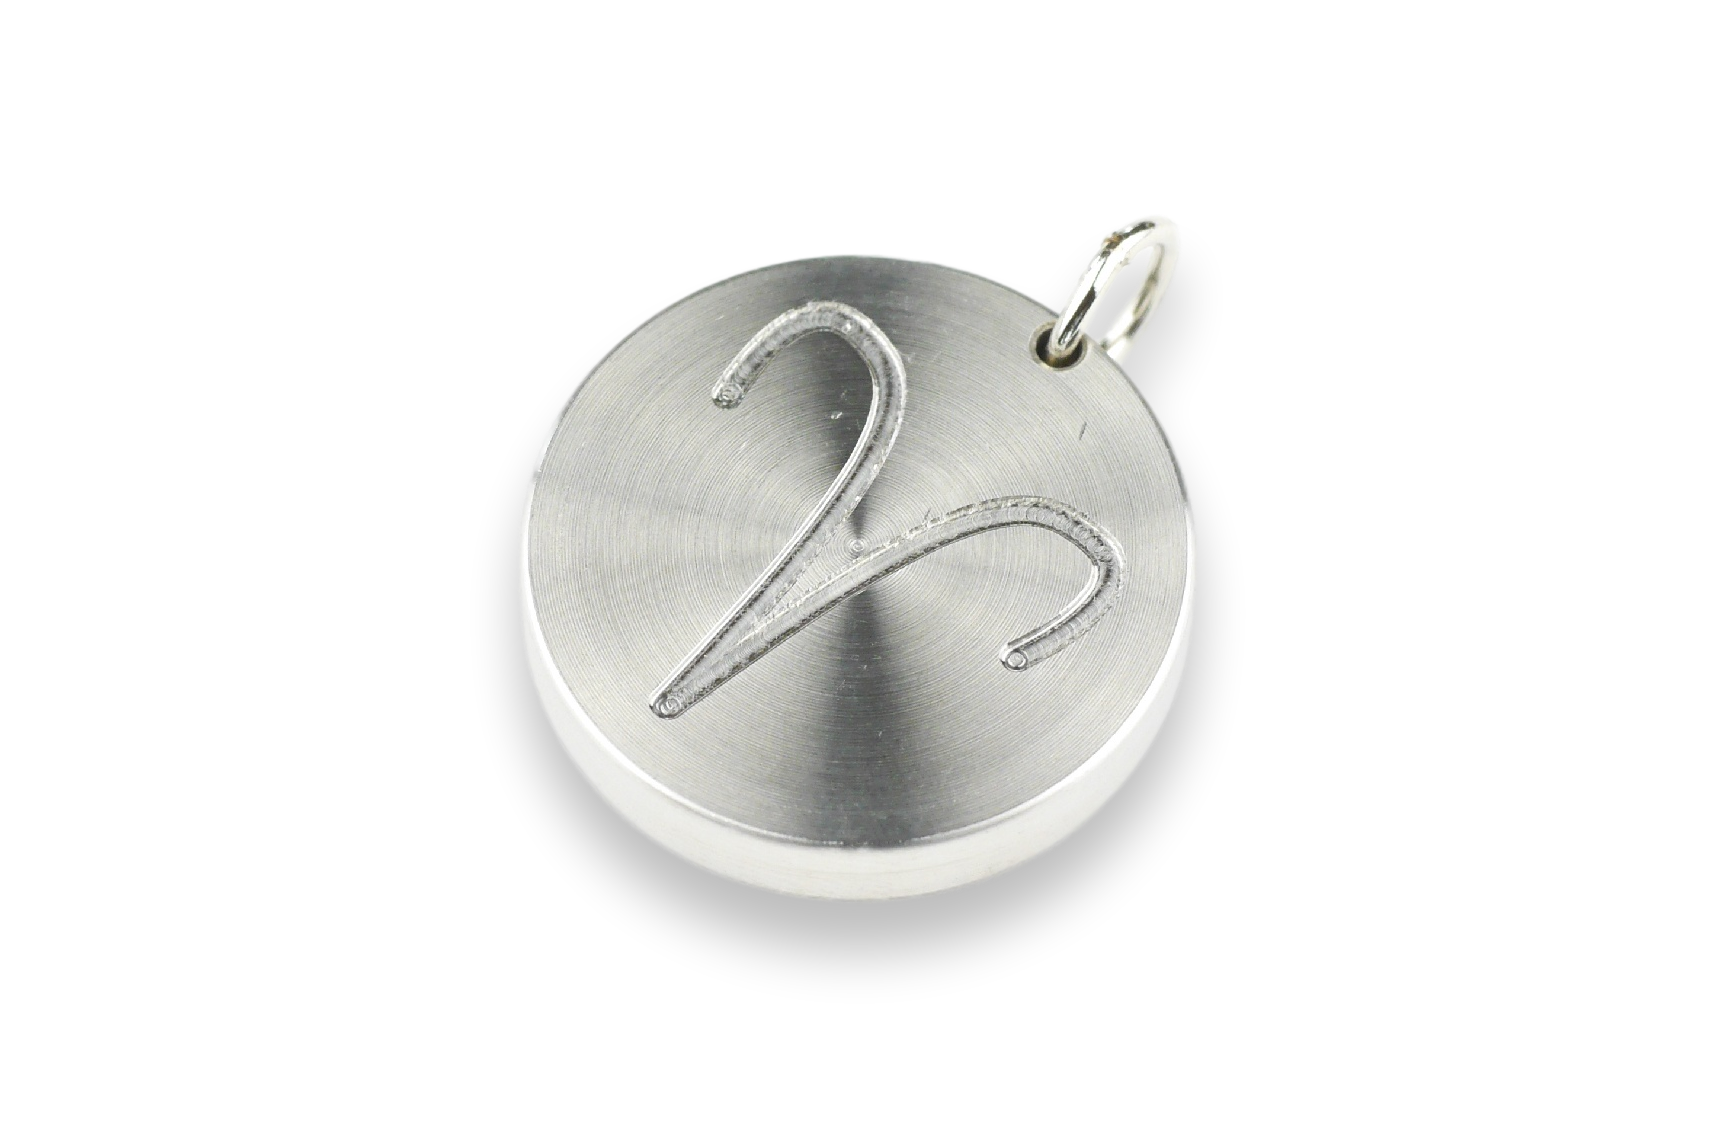 ZES Bodyguard 25 stainless steel with star sign Aries engraving